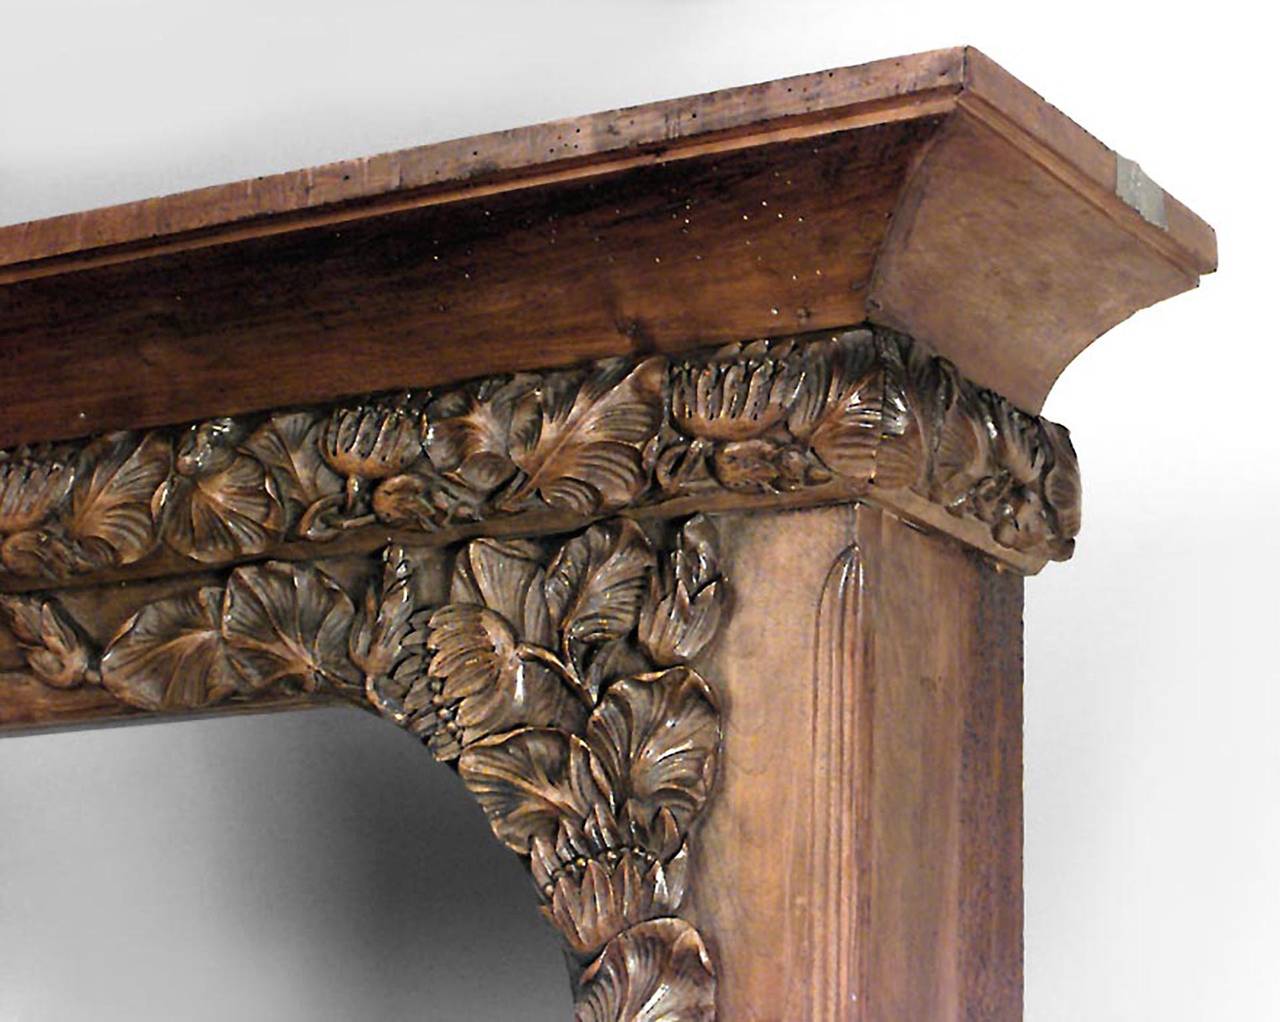 French Art Nouveau walnut narrow 3 section bookcase/archway with 6 shelves and carved floral trim.
